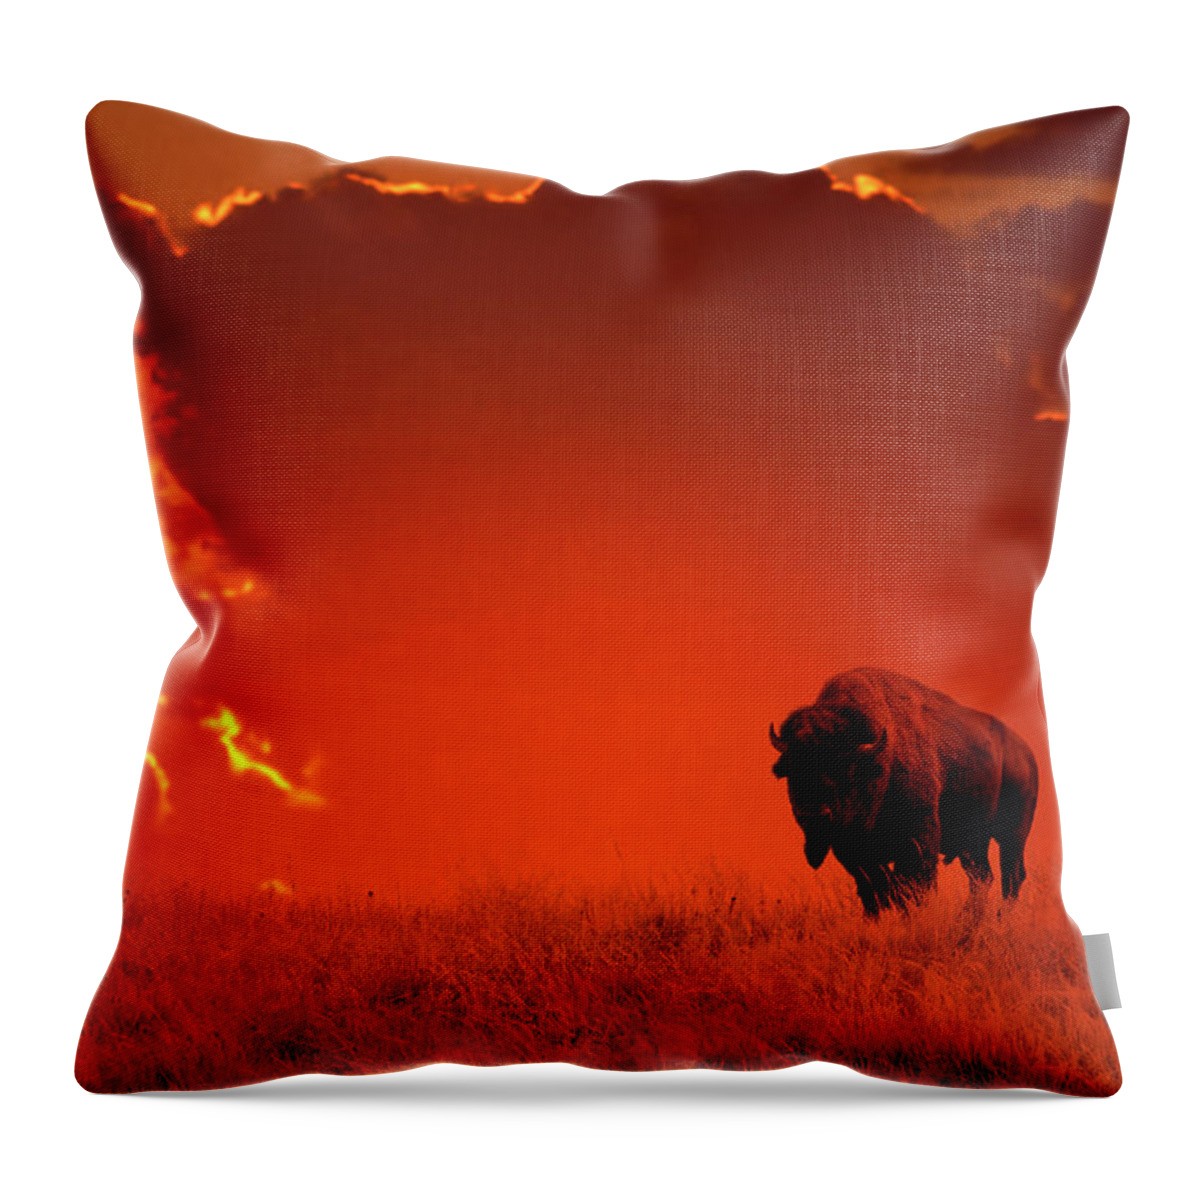 Scenics Throw Pillow featuring the photograph Bison At Sunset by Mark Newman